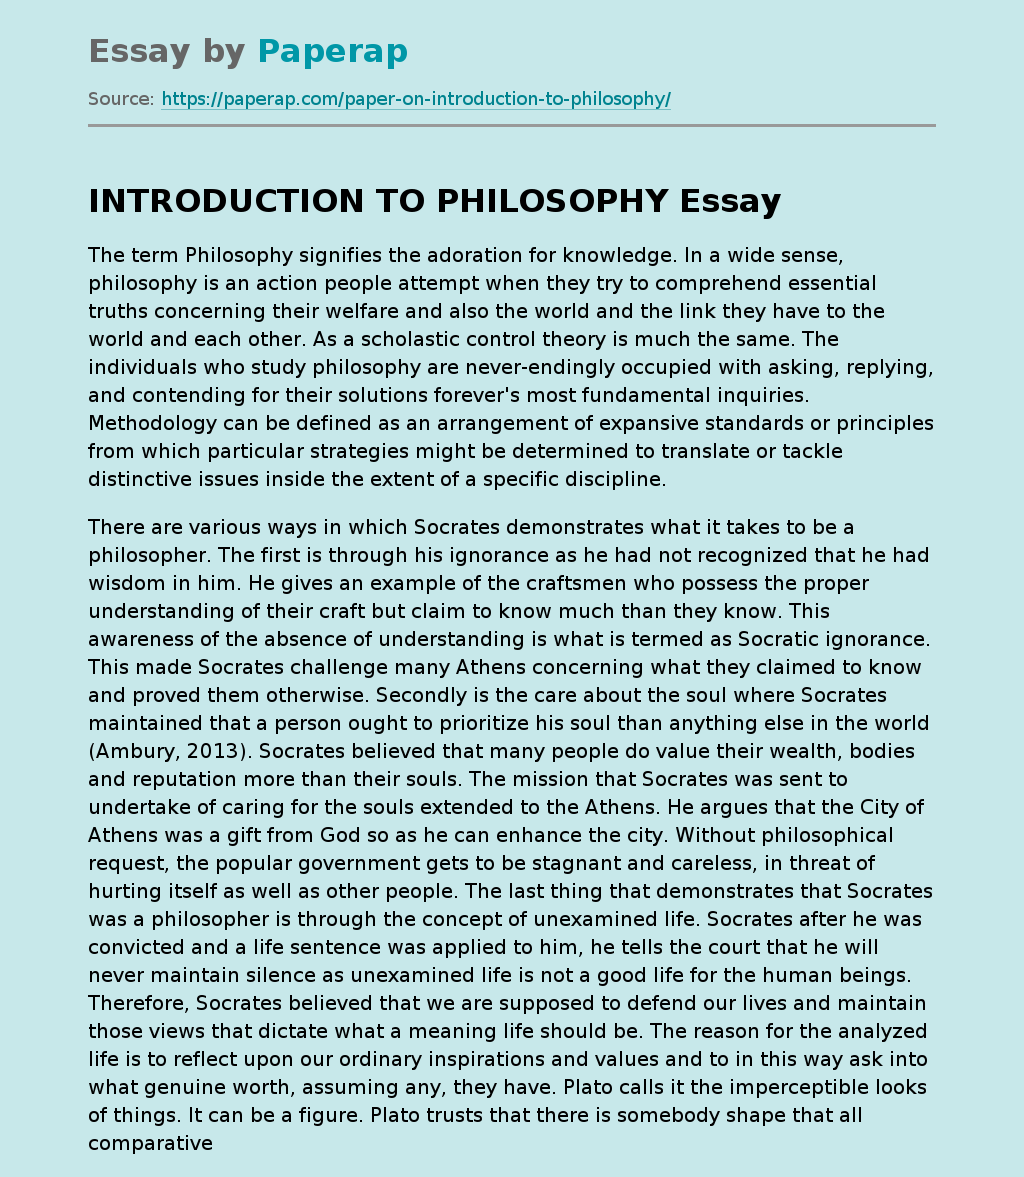 how to conclude philosophy essay